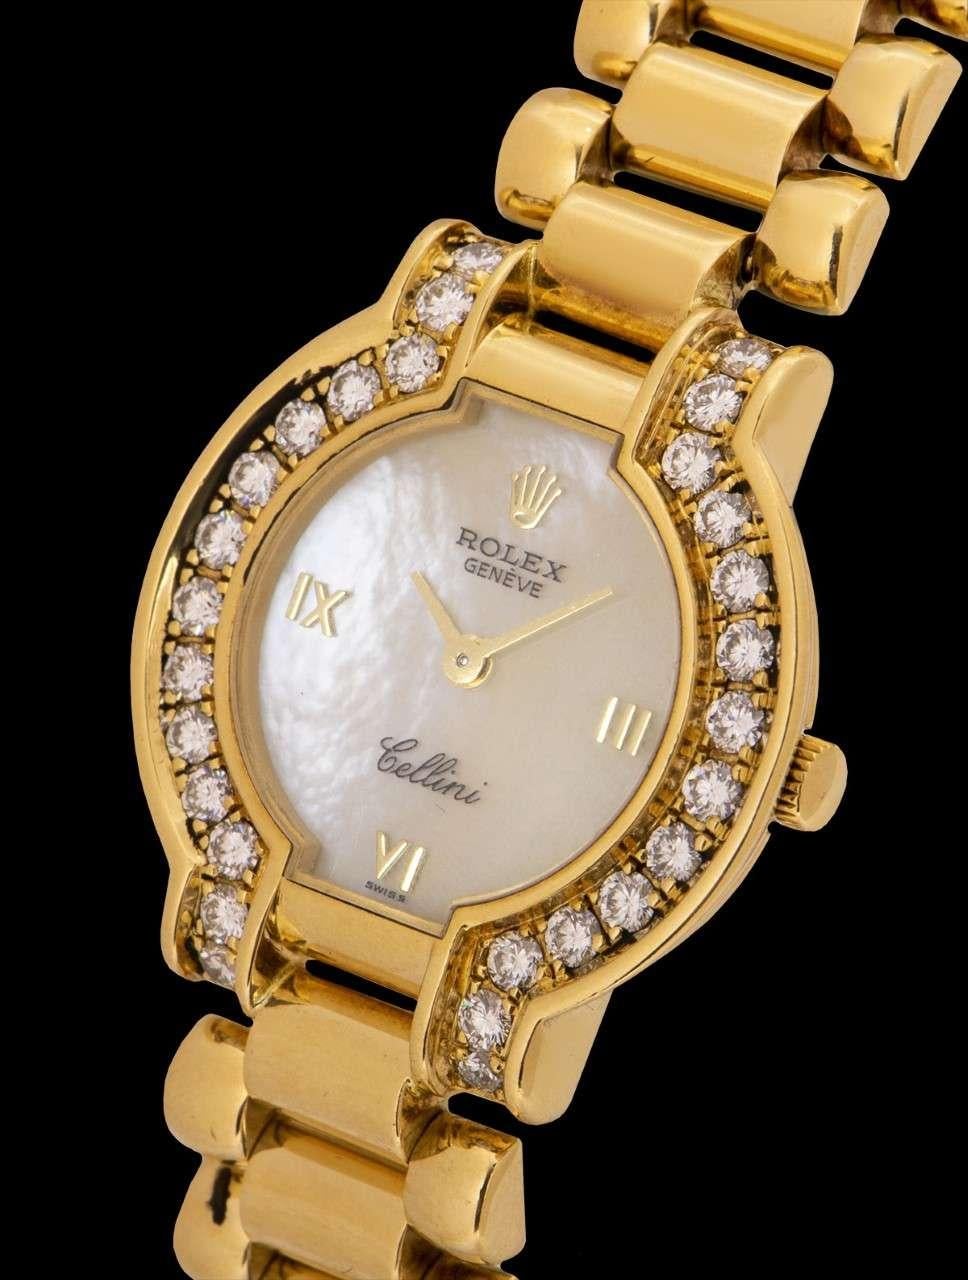 An 18k Yellow Gold Cellini Ladies Wristwatch, white mother of pearl dial with applied roman numerals, a fixed 18k yellow gold bezel set with 28 round brilliant cut diamonds, an 18k yellow gold bracelet with a concealed 18k gold deployant clasp,